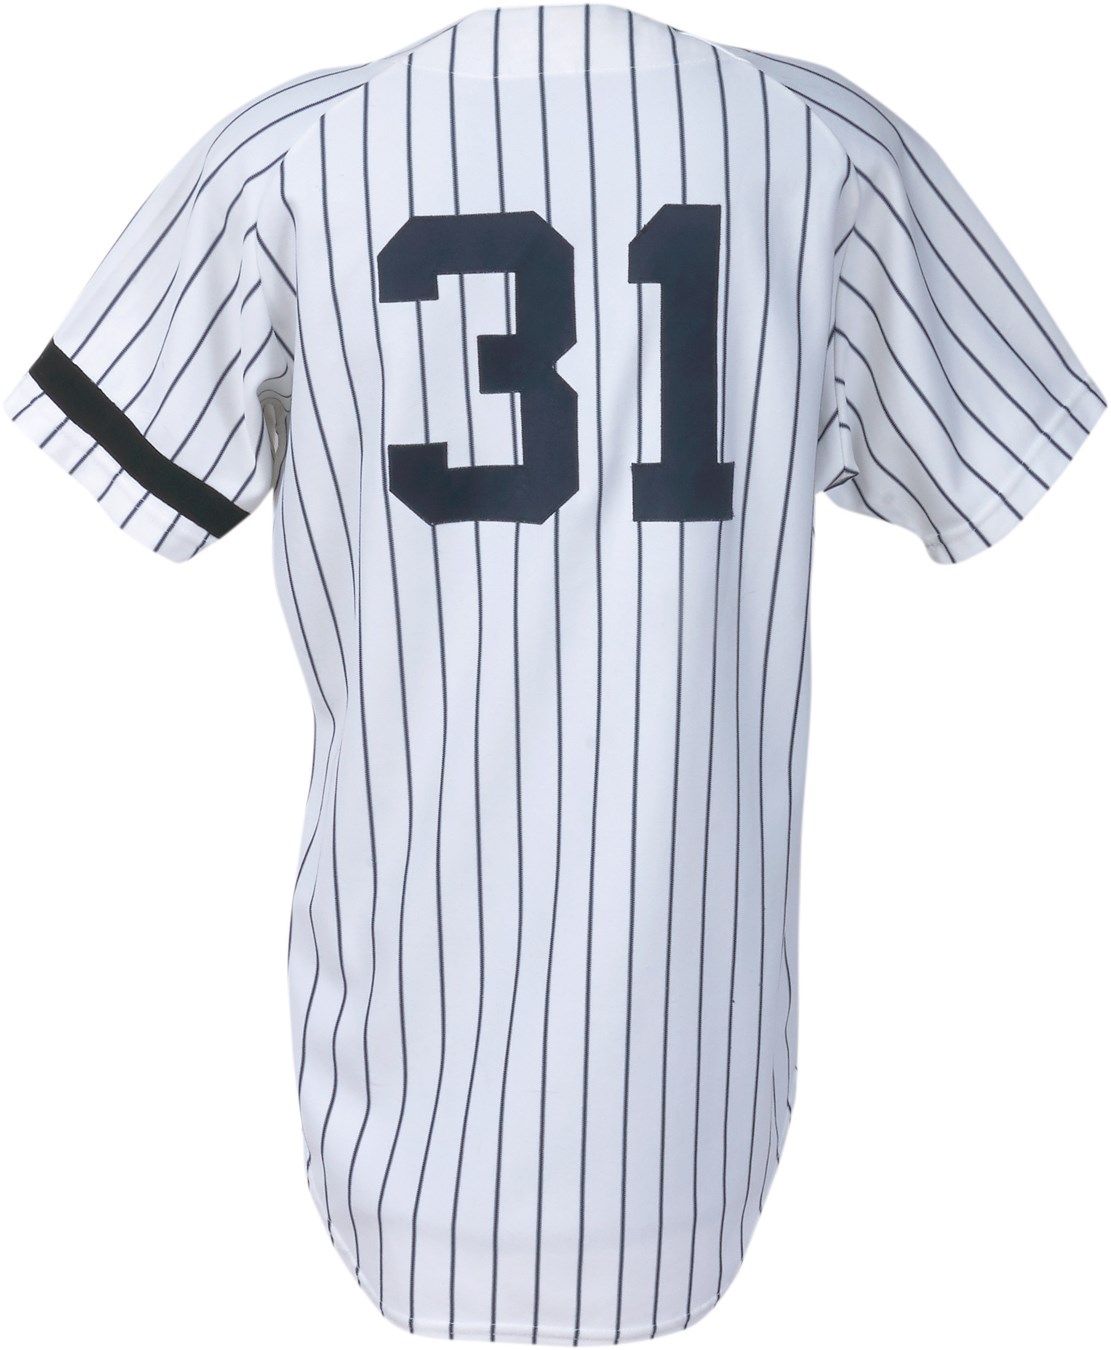 NY Yankees, Giants & Mets - 1985 Dave Winfield New York Yankees Game Worn Jersey (Photo-Match)